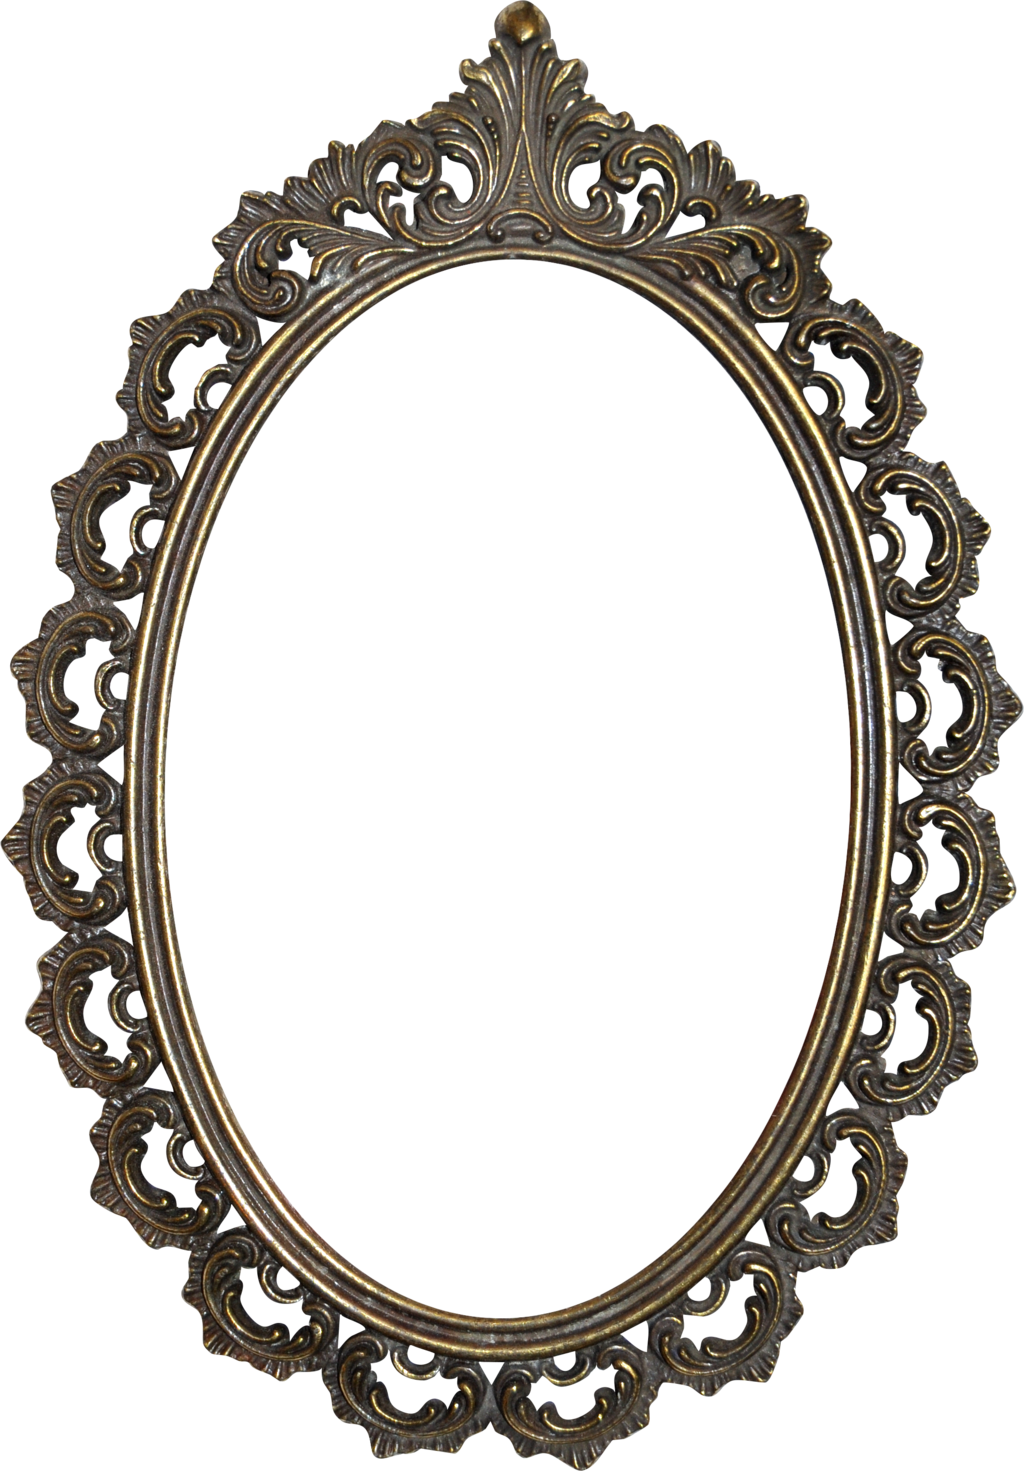 Picture Frames Mirror Decorative arts - mirror png download - 1024*1471